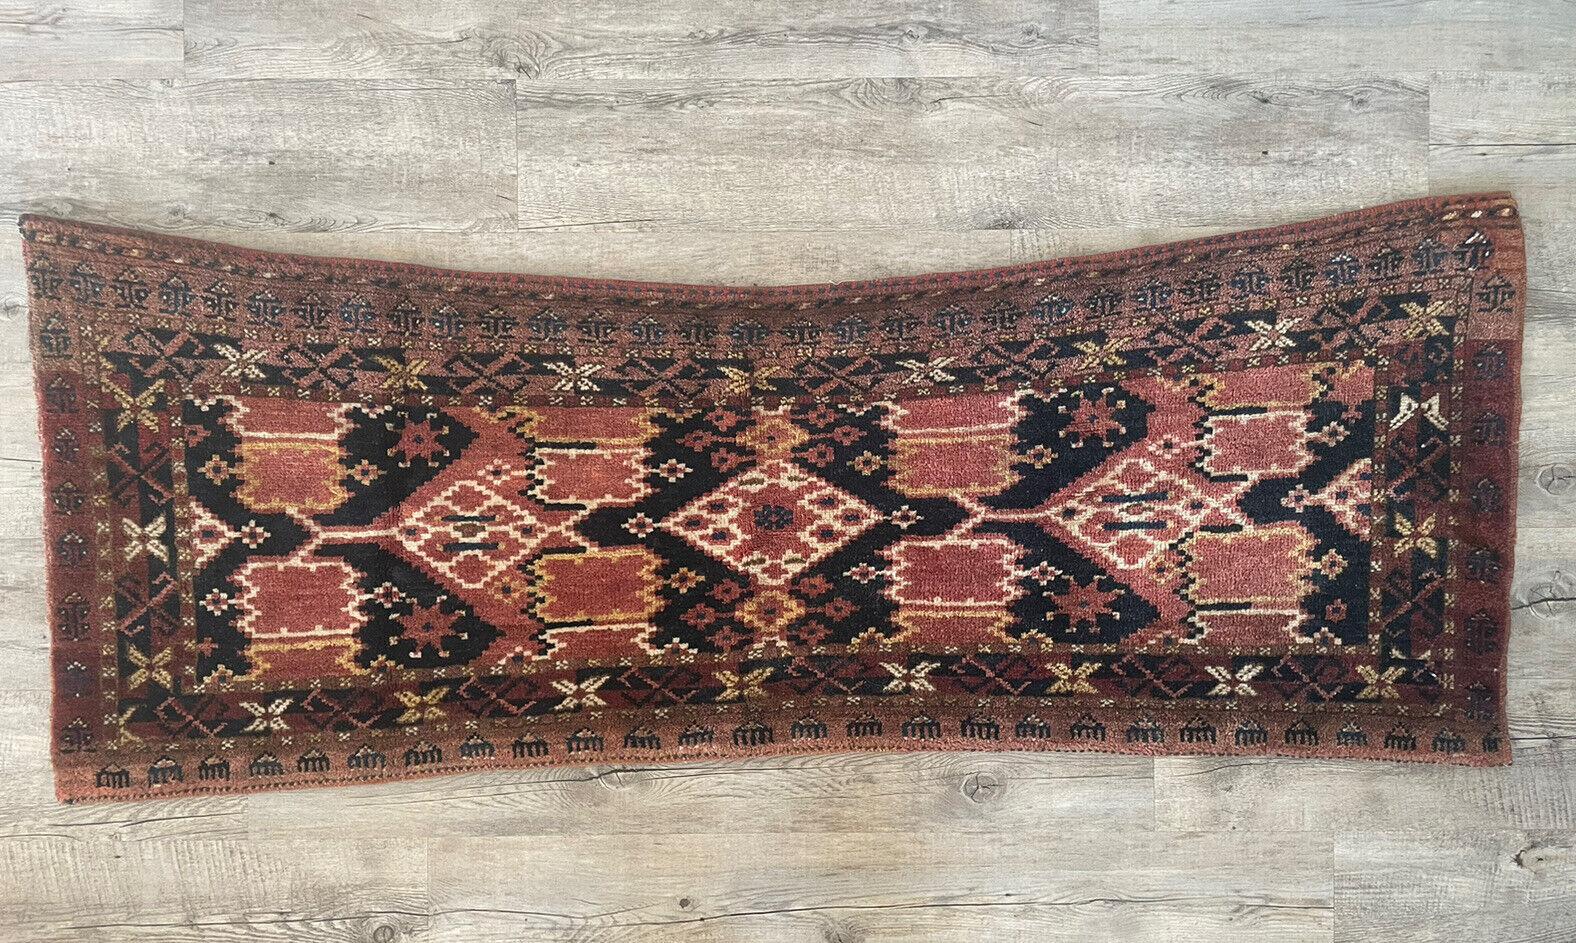 Handmade Antique Afghan Beshir Collectible Chuval Rug 1.5' x 4.8', 1900s - 1N11 For Sale 11